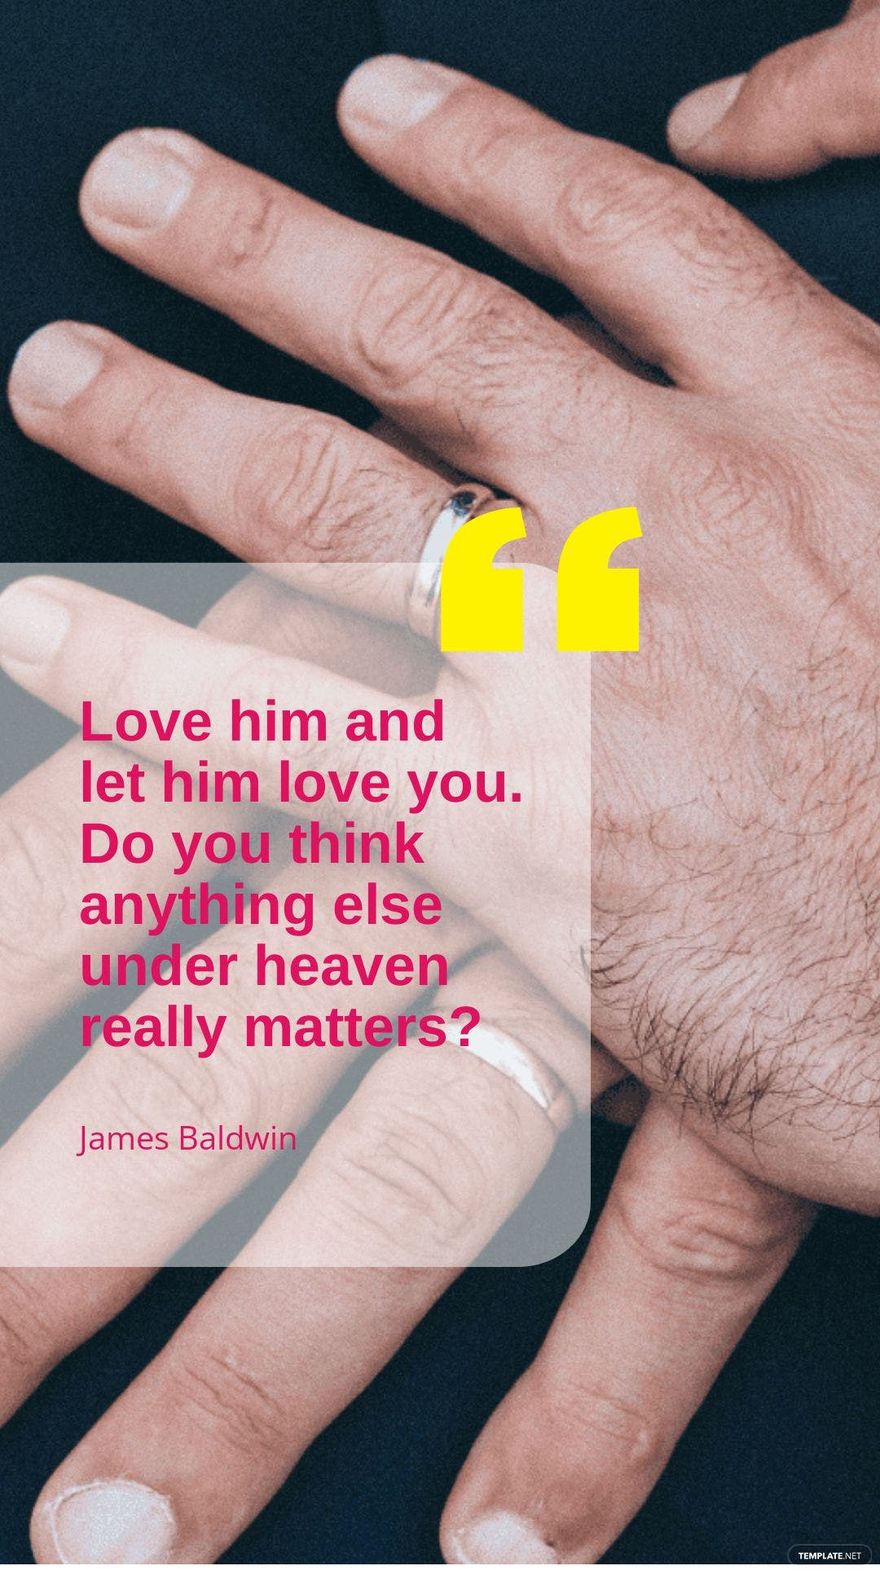 James Baldwin - Love him and let him love you. Do you think anything else under heaven really matters? Template